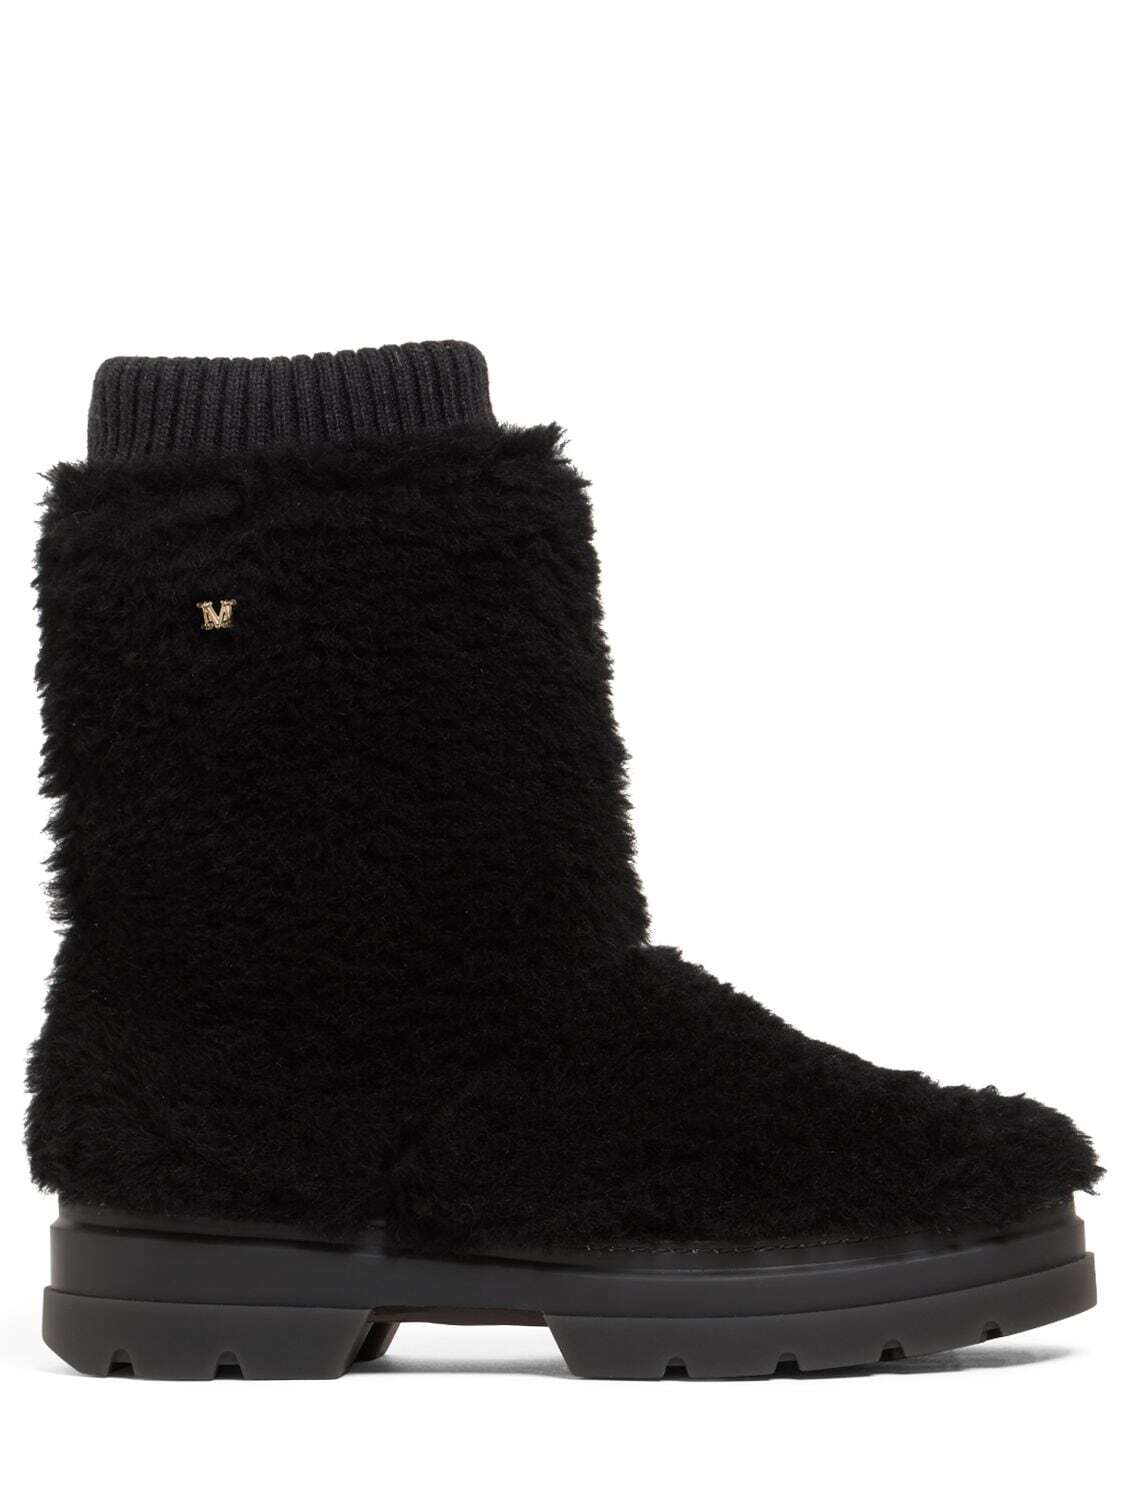 MAX MARA 30mm Tanith Wool & Silk Ankle Boots in black